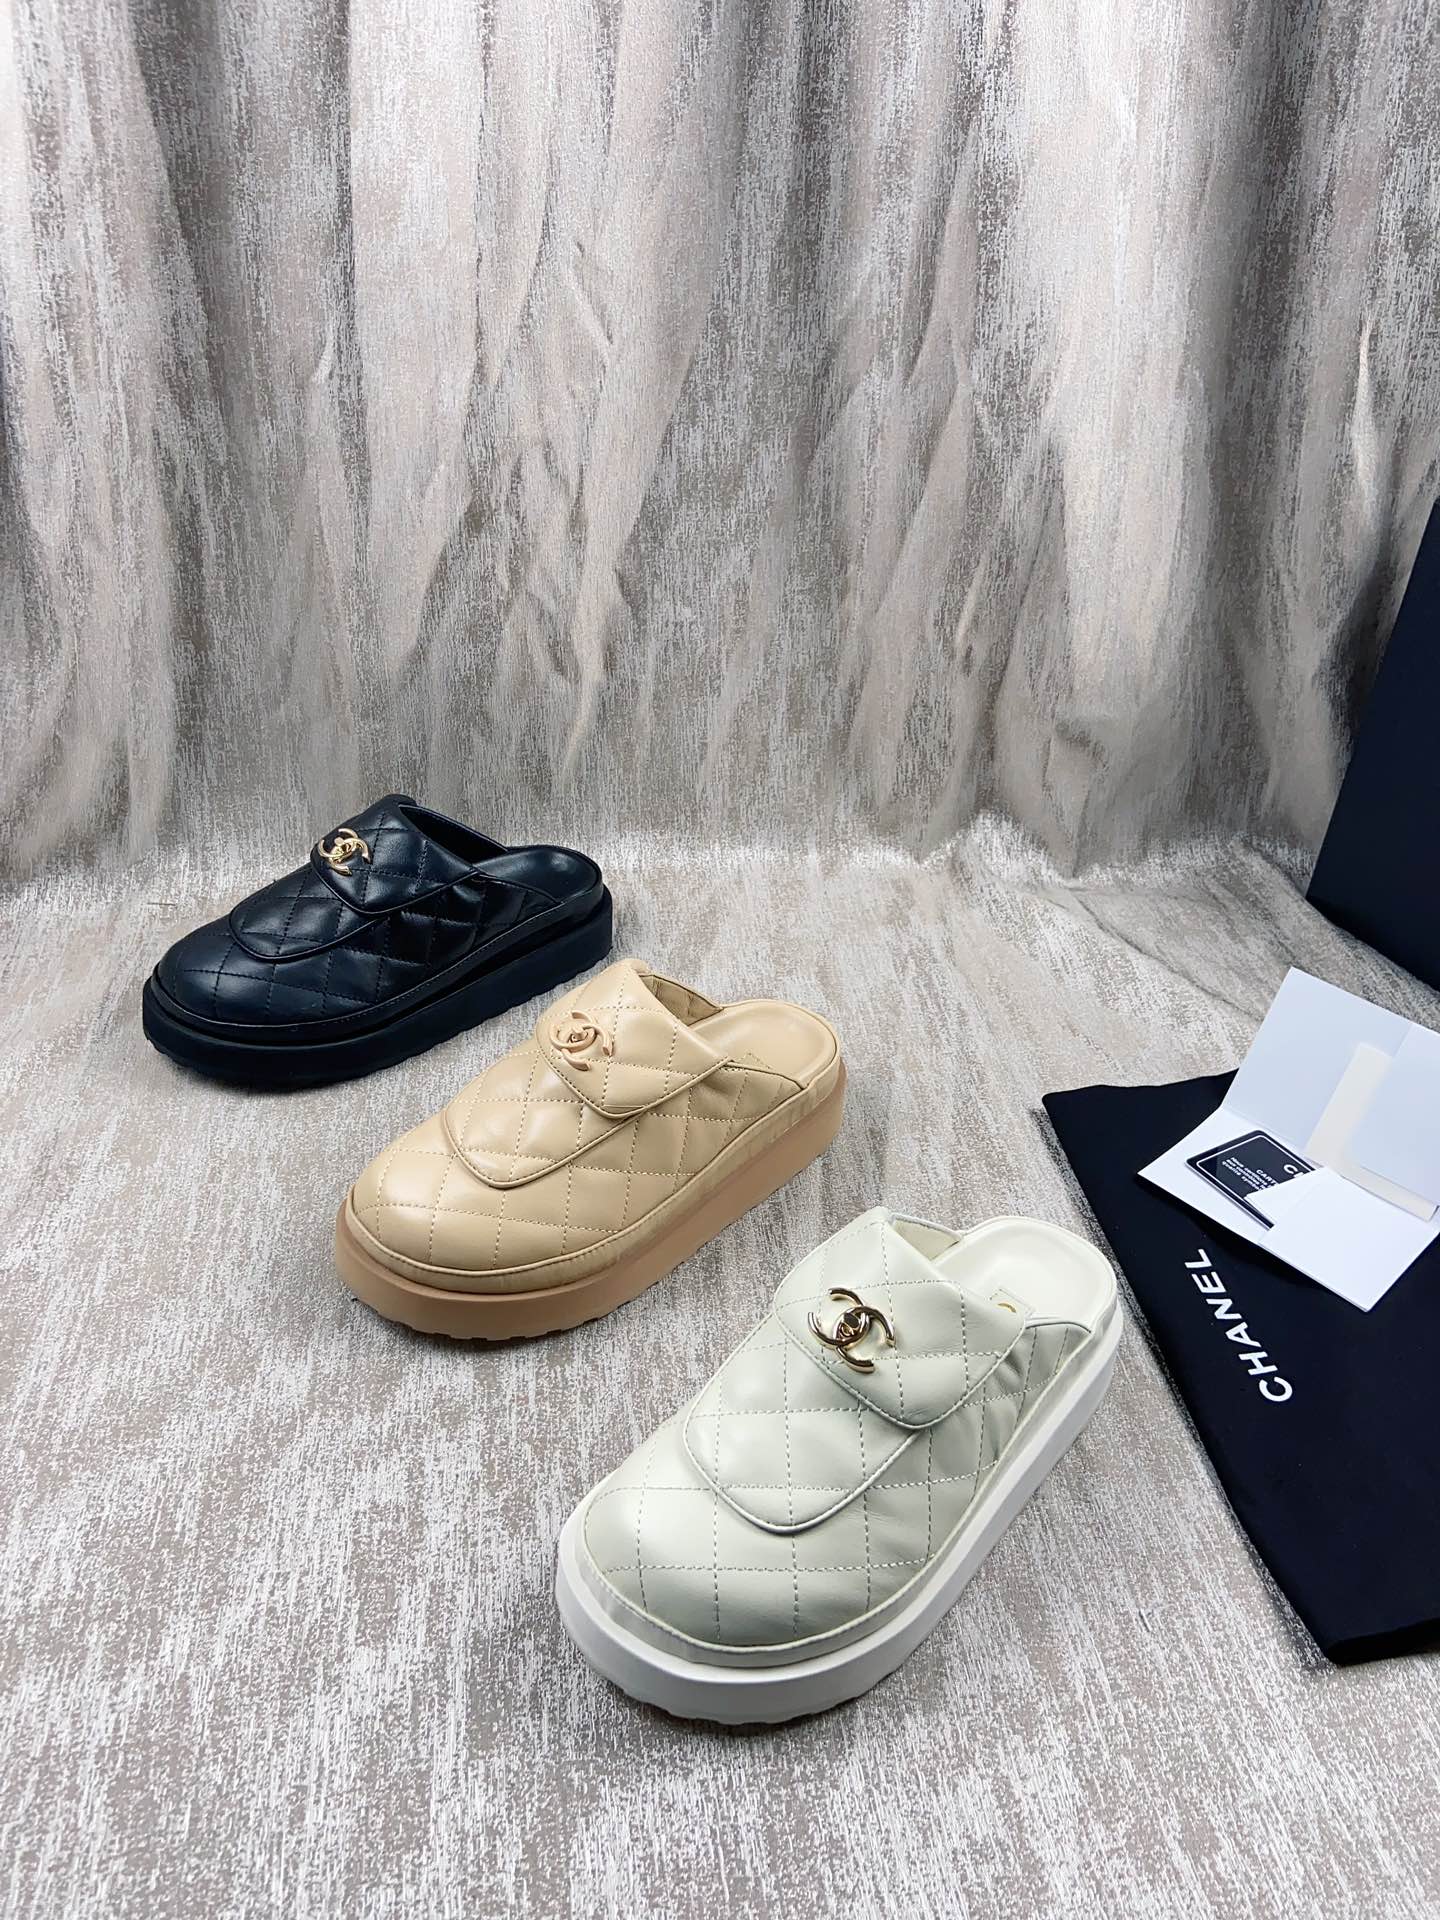 Chanel Shoes Loafers Sandals Slippers Replica For Cheap
 Gold Hardware Cowhide Sheepskin Silk Spring Collection Vintage